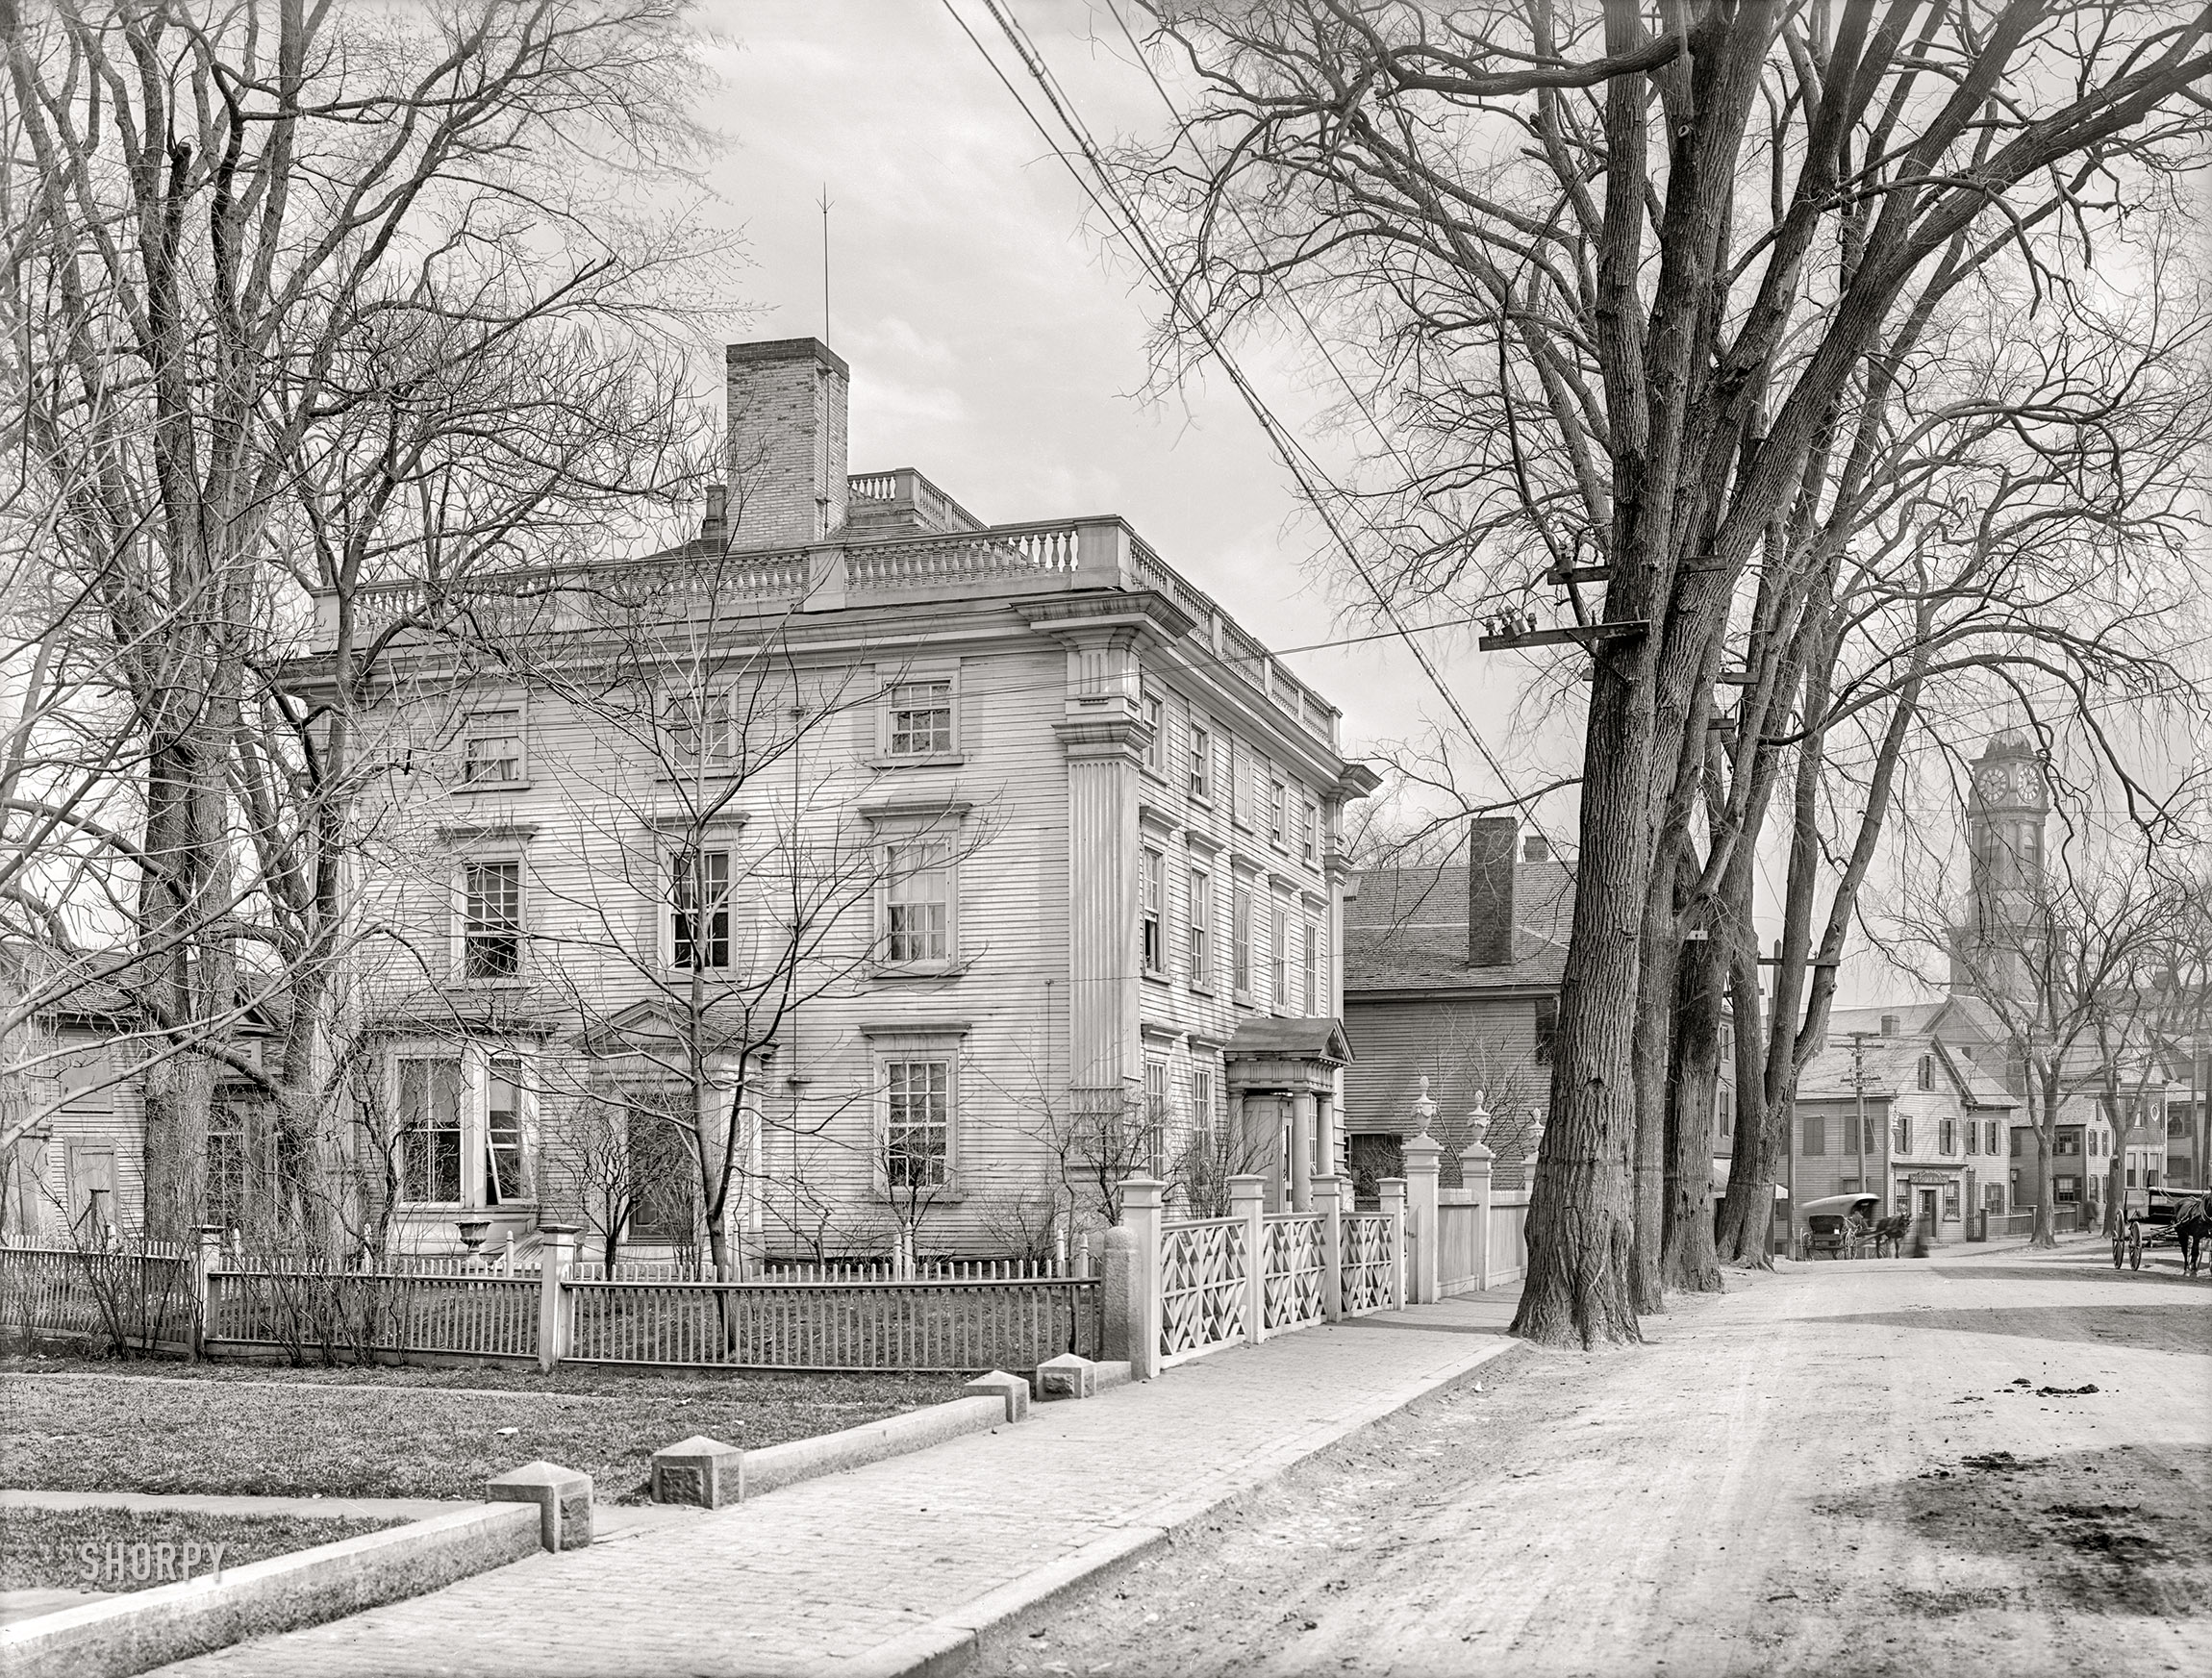 Salem, Massachusetts, circa 1906. "Peirce-Nichols house (completed 1782), Federal Street." 8x10 inch dry plate glass negative, Detroit Publishing Company. View full size.